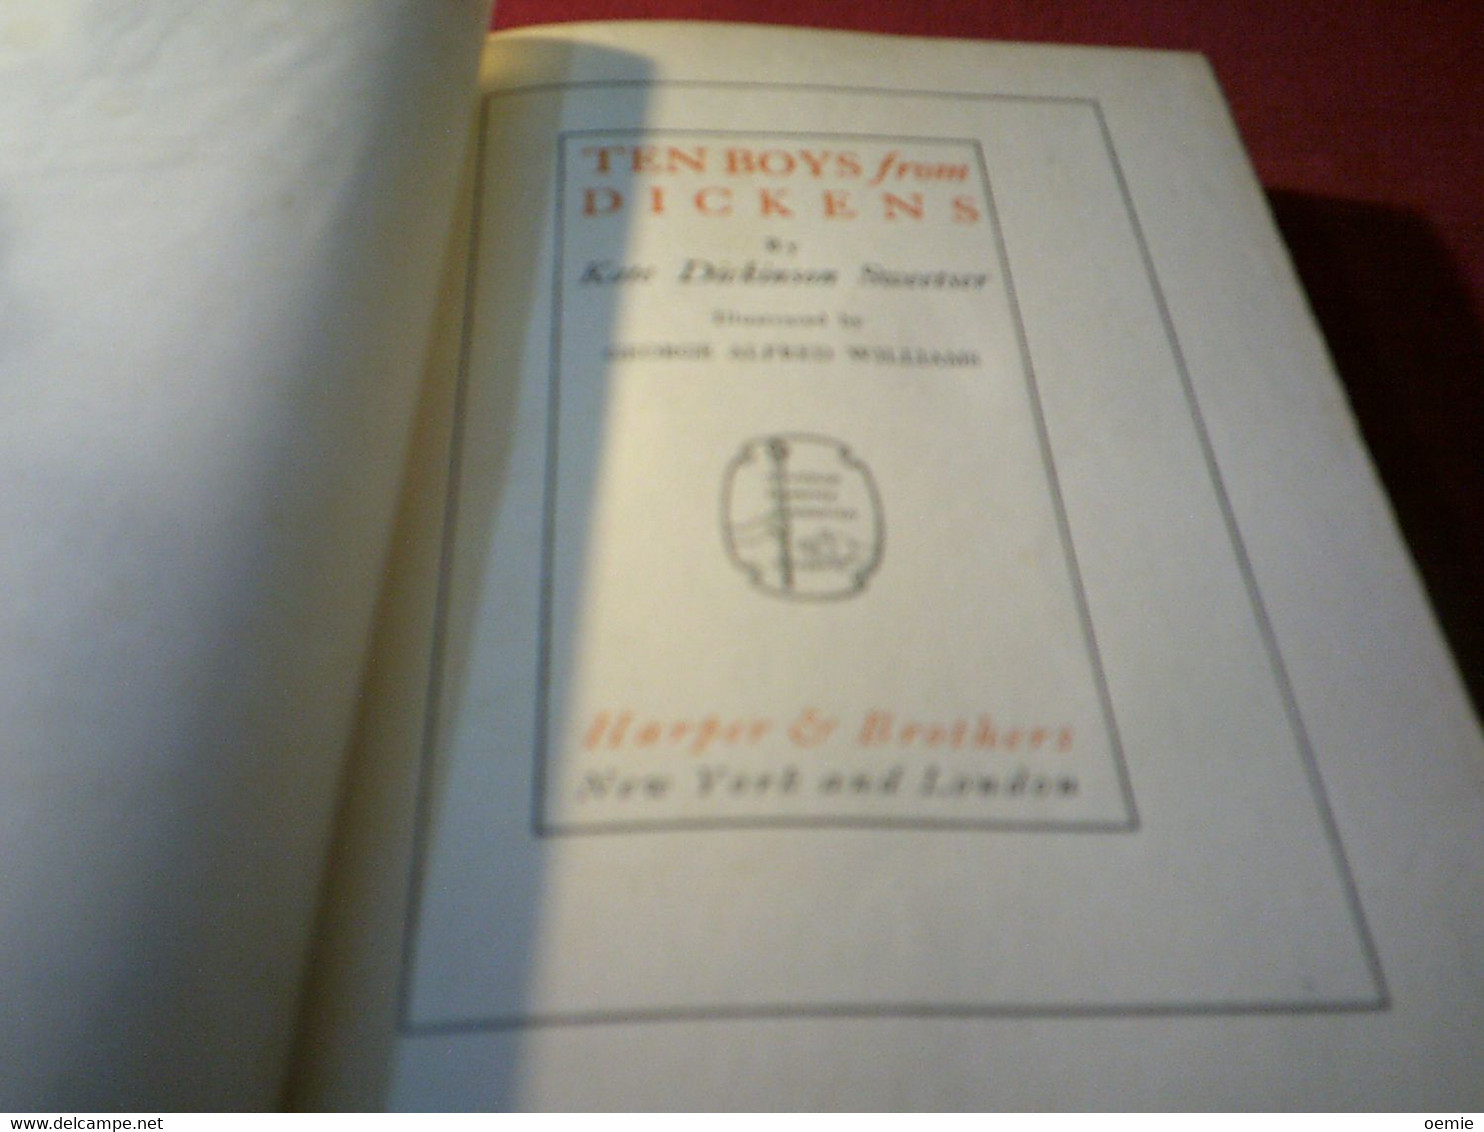 THE BOYS  FROM DICKENS    /   EDITION HARPER & BROTHERS  NEW YORK  AND LONDON  1901 JANVIER - Libros Ilustrados